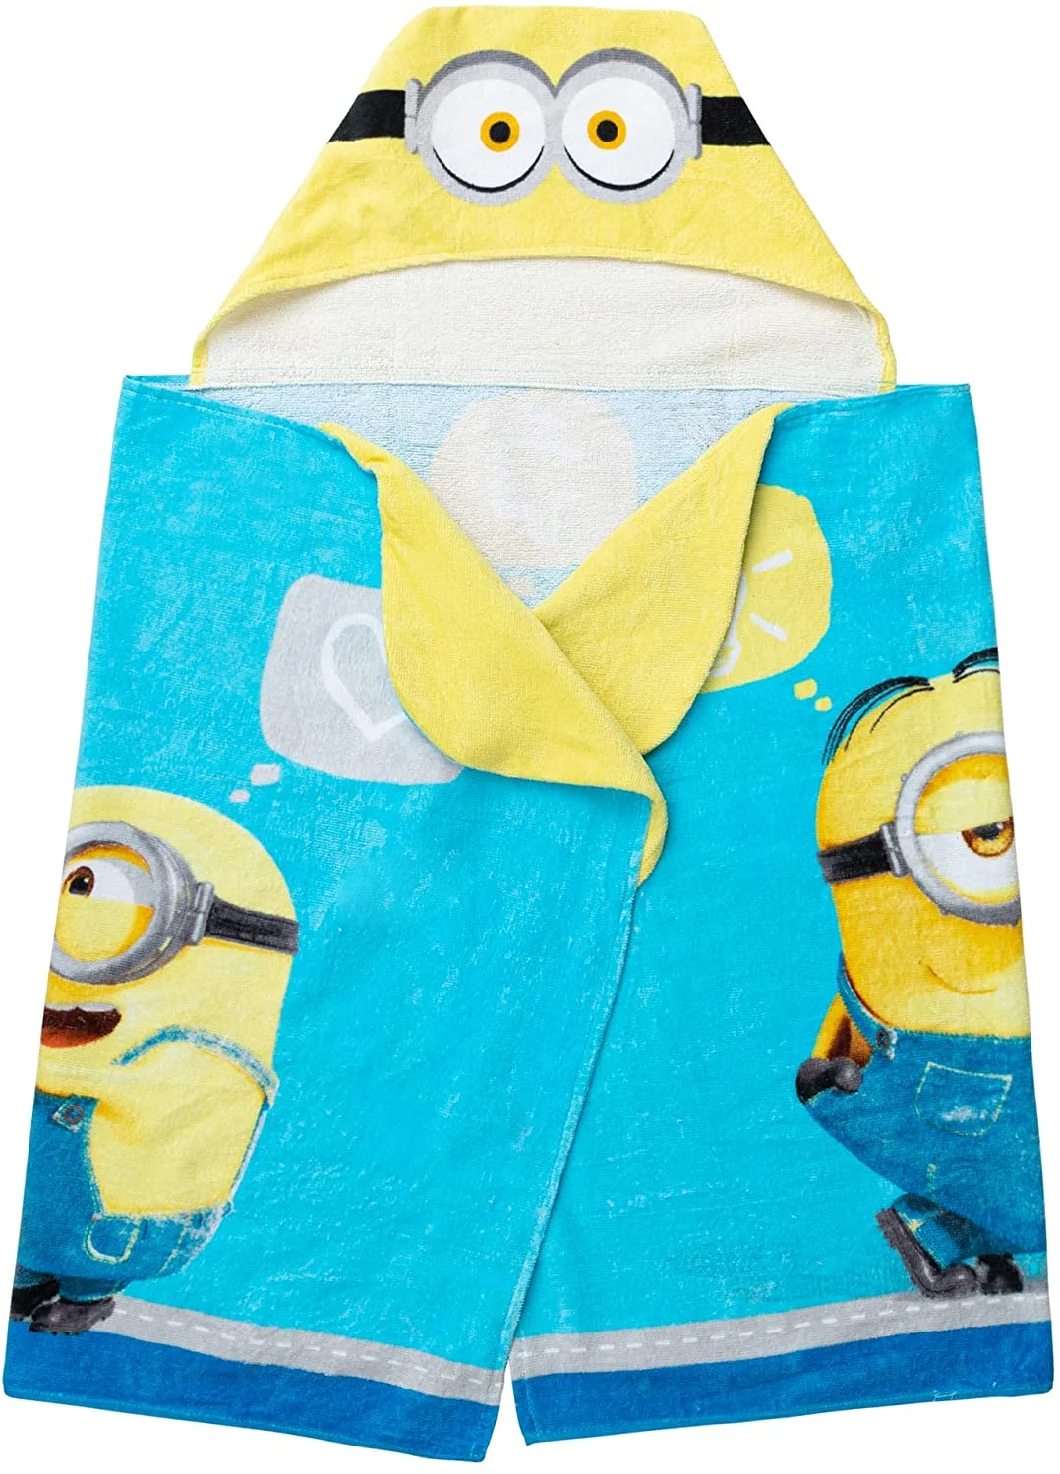 Kids Bath and Beach Soft Cotton Terry Hooded Towel Wrap, 24